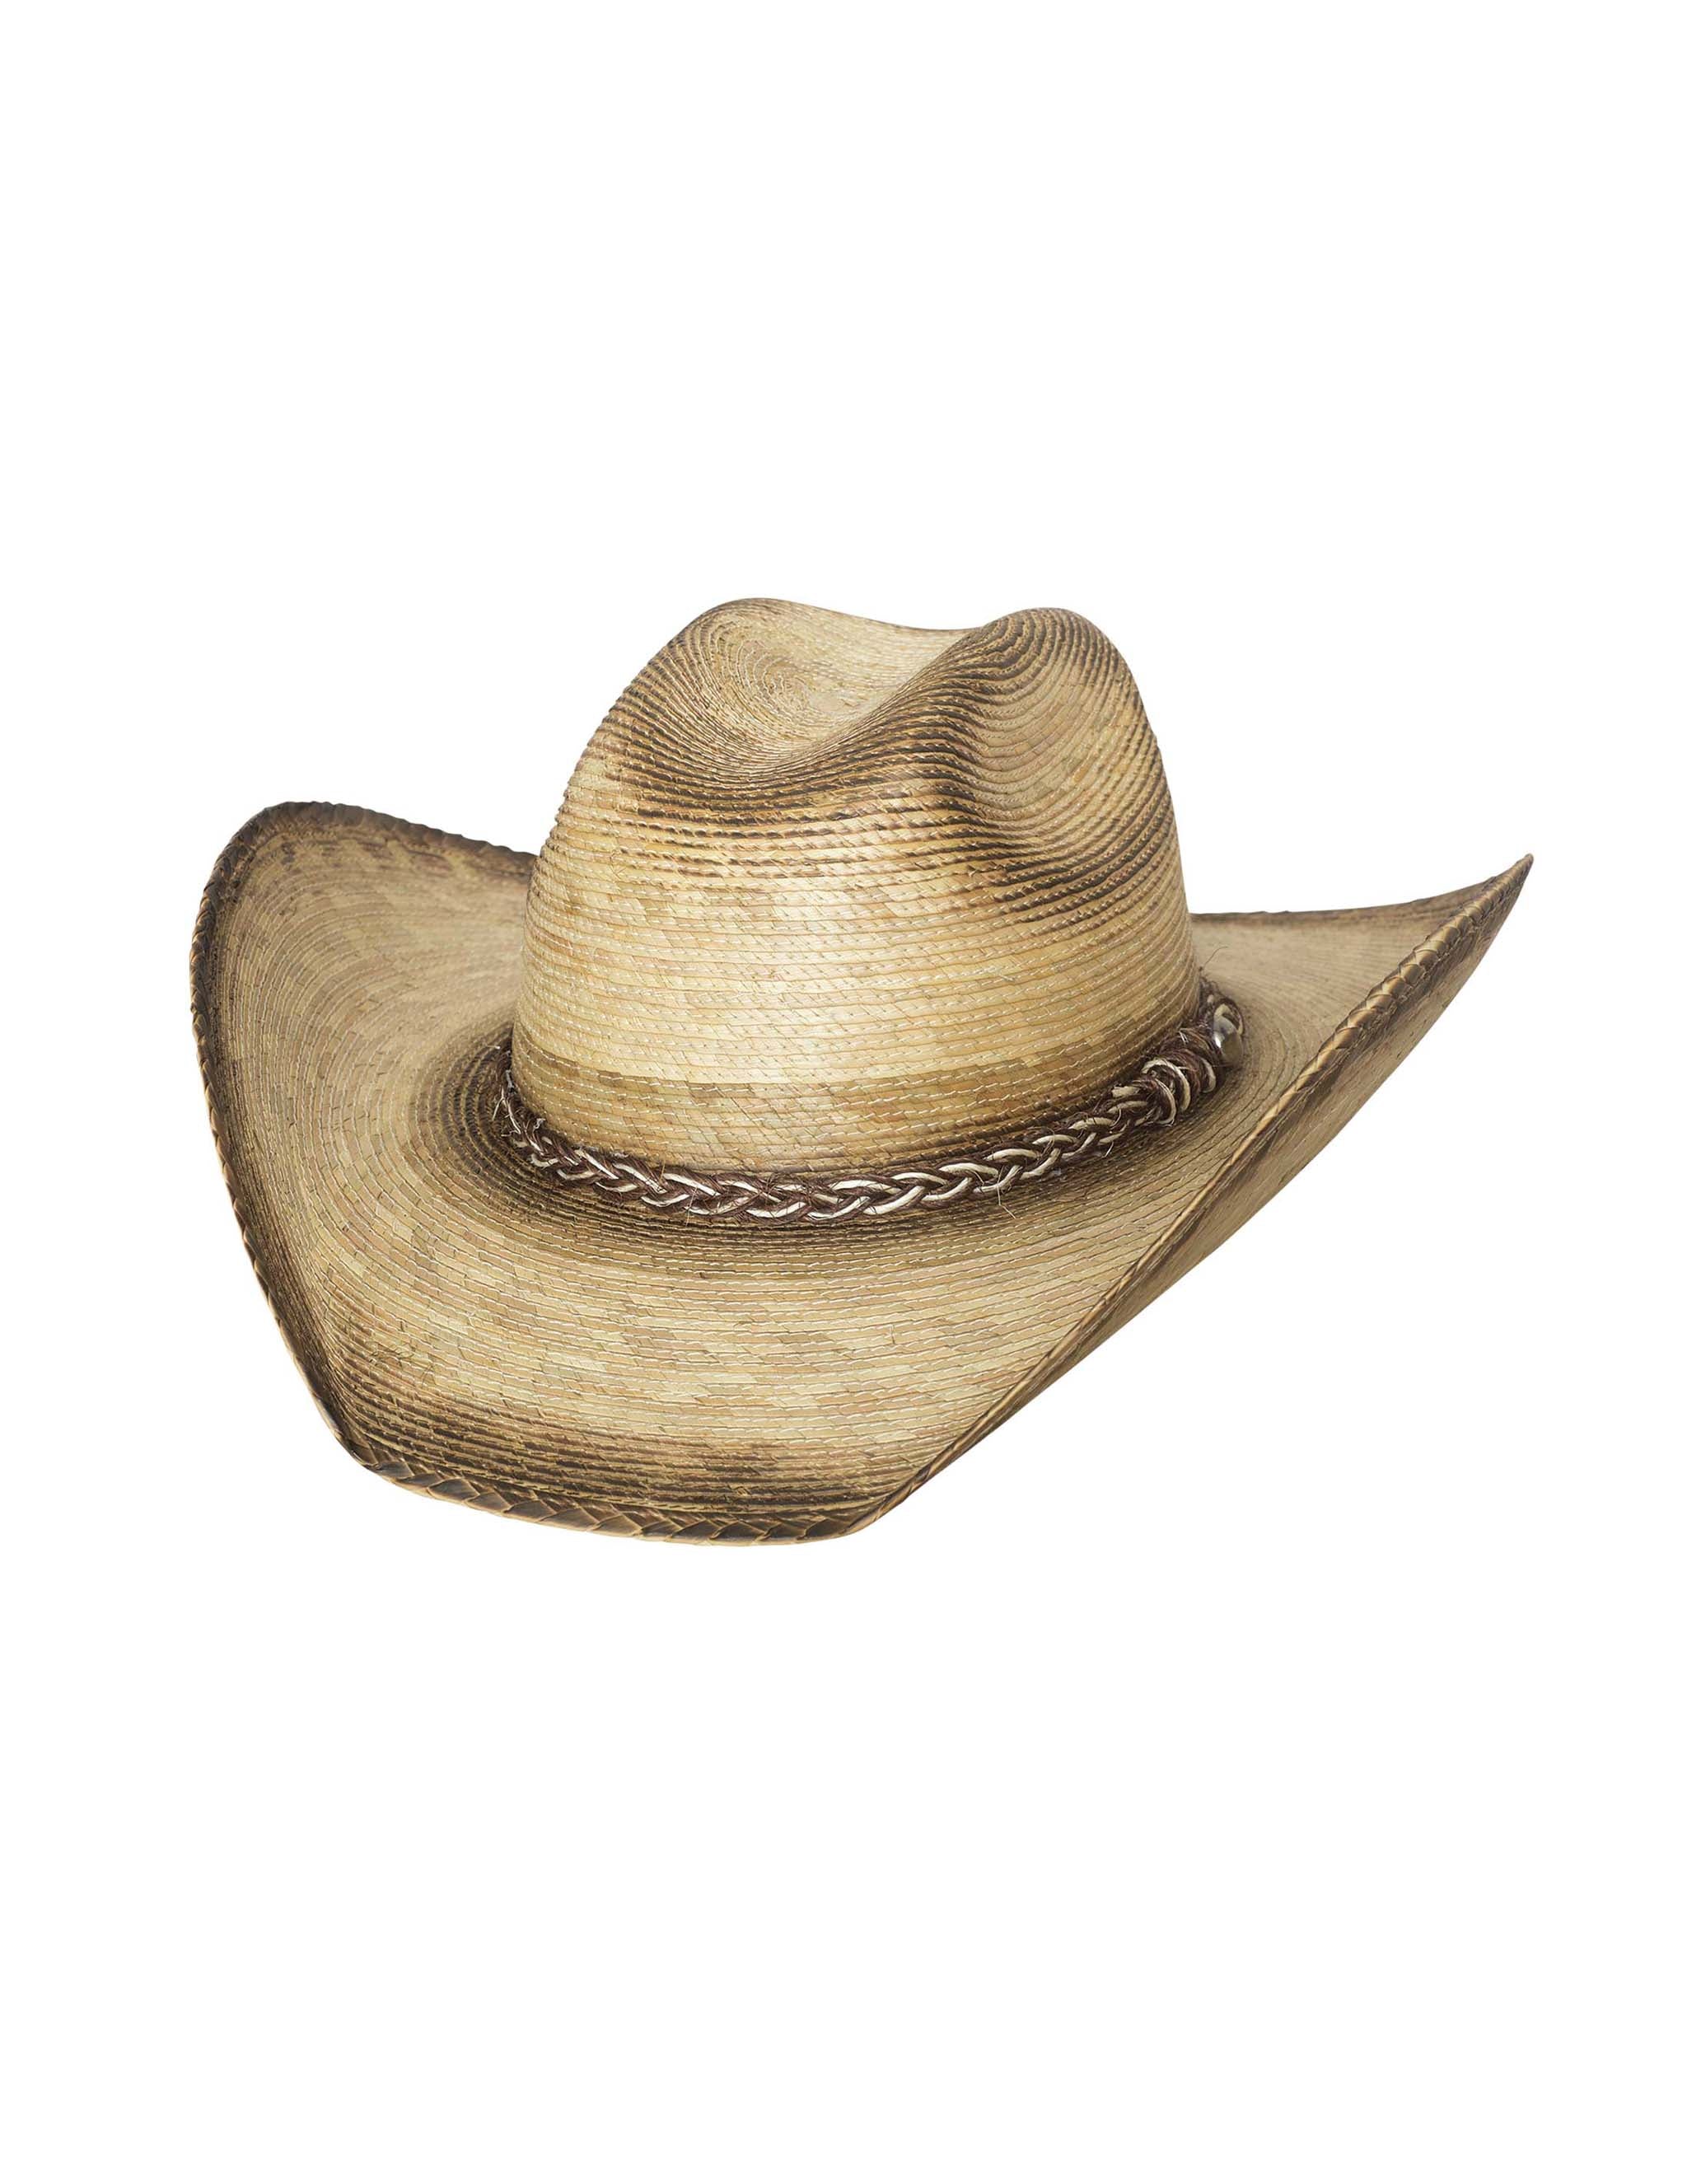 Chapeau Cowboy Femme Naughty Rose - Bullhide Reference : 6707